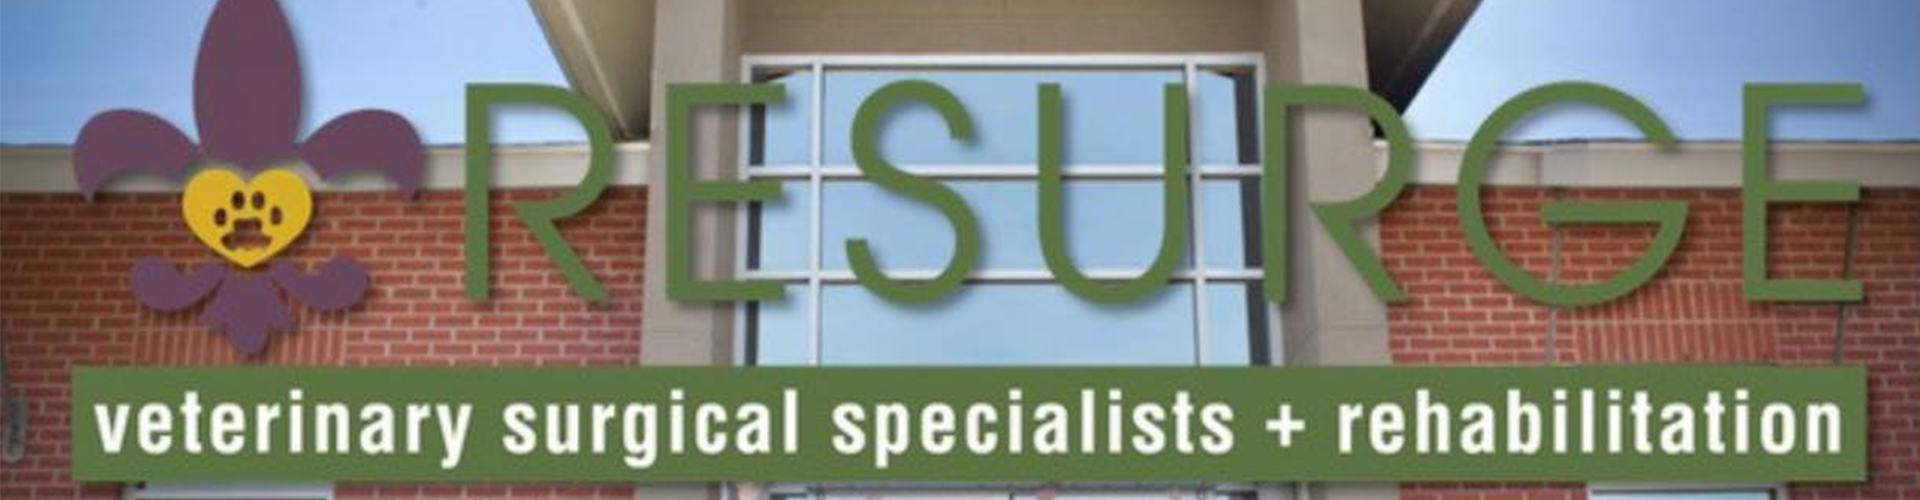 Resurge Veterinary Surgical Specialists and Rehabilitation, LLC.